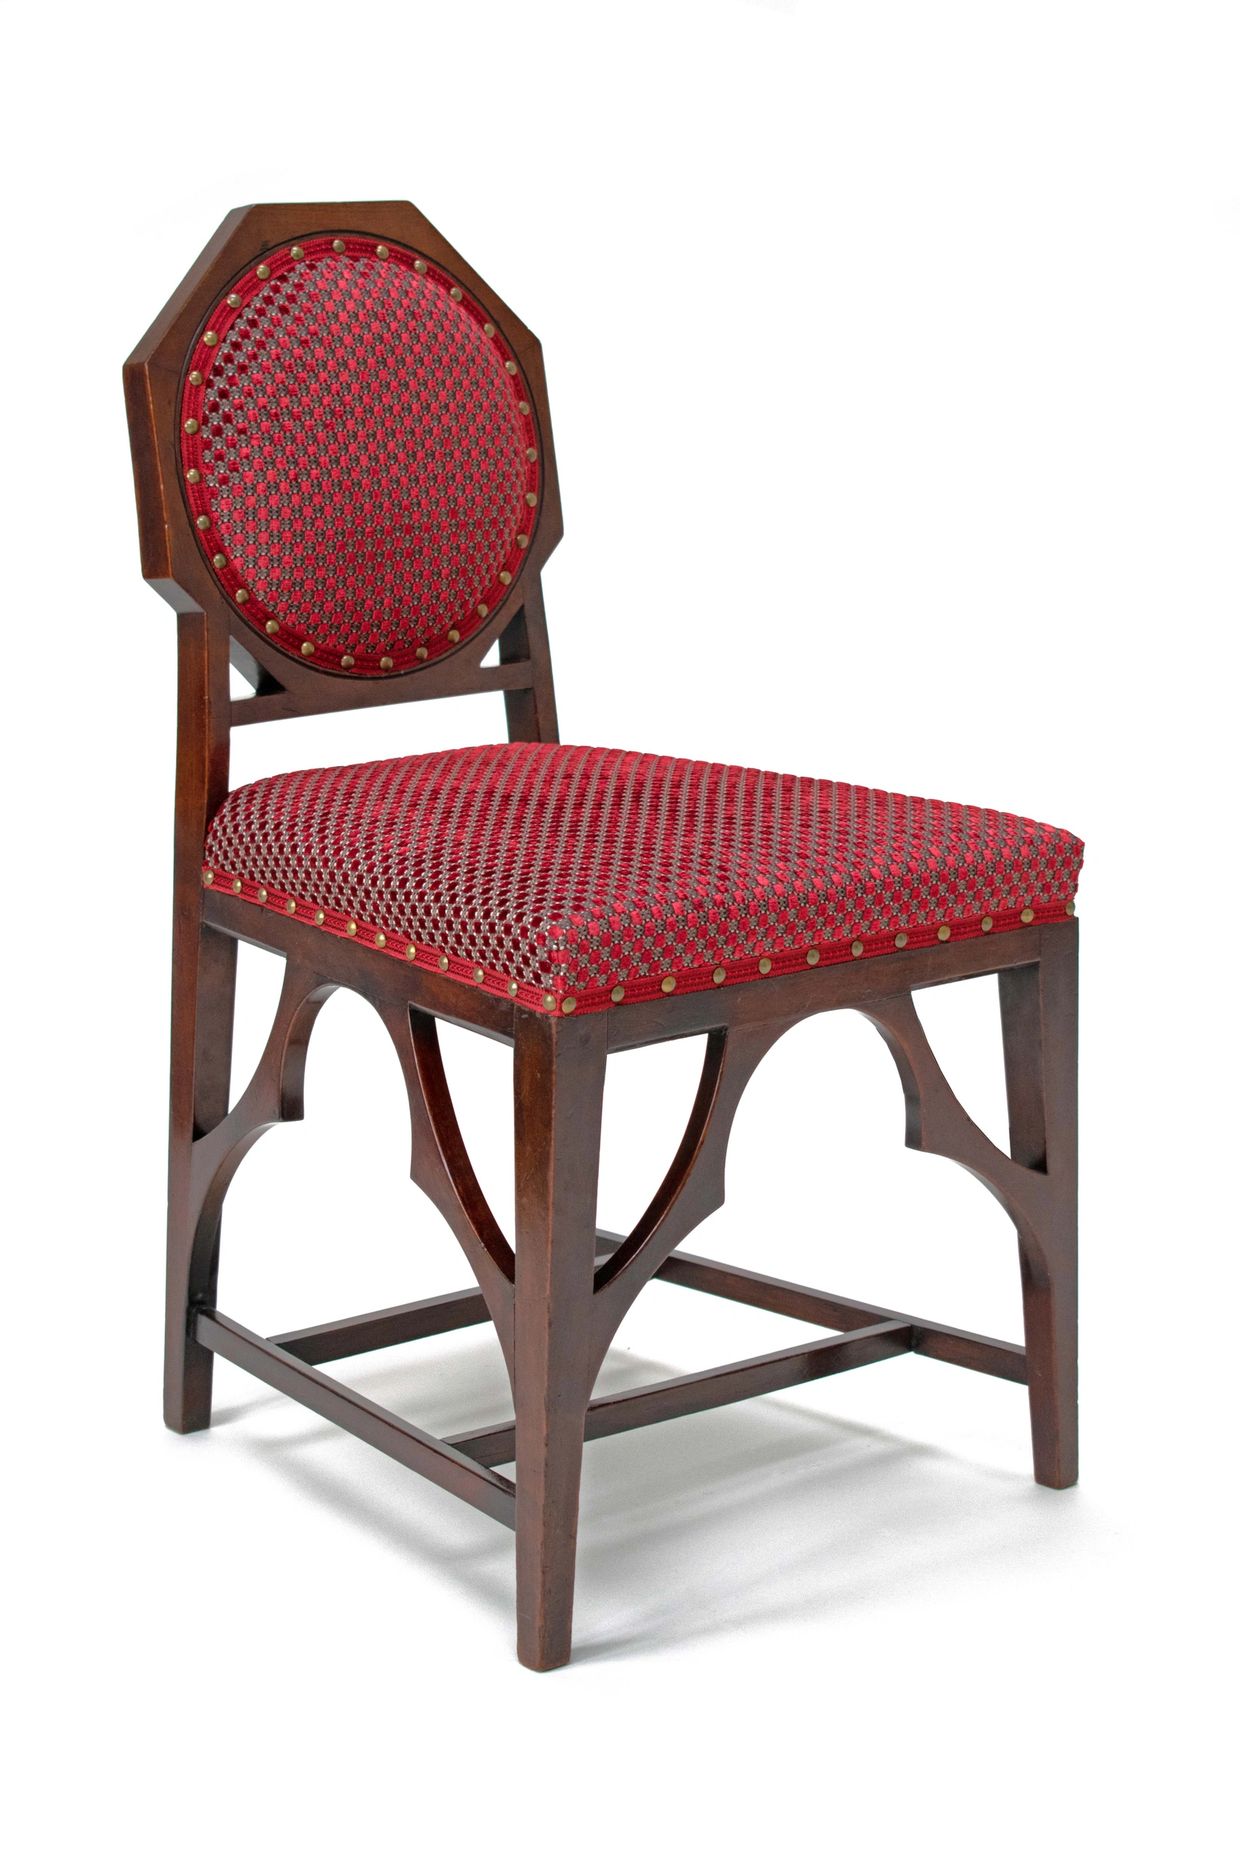 chair designed by dr christopher dresser